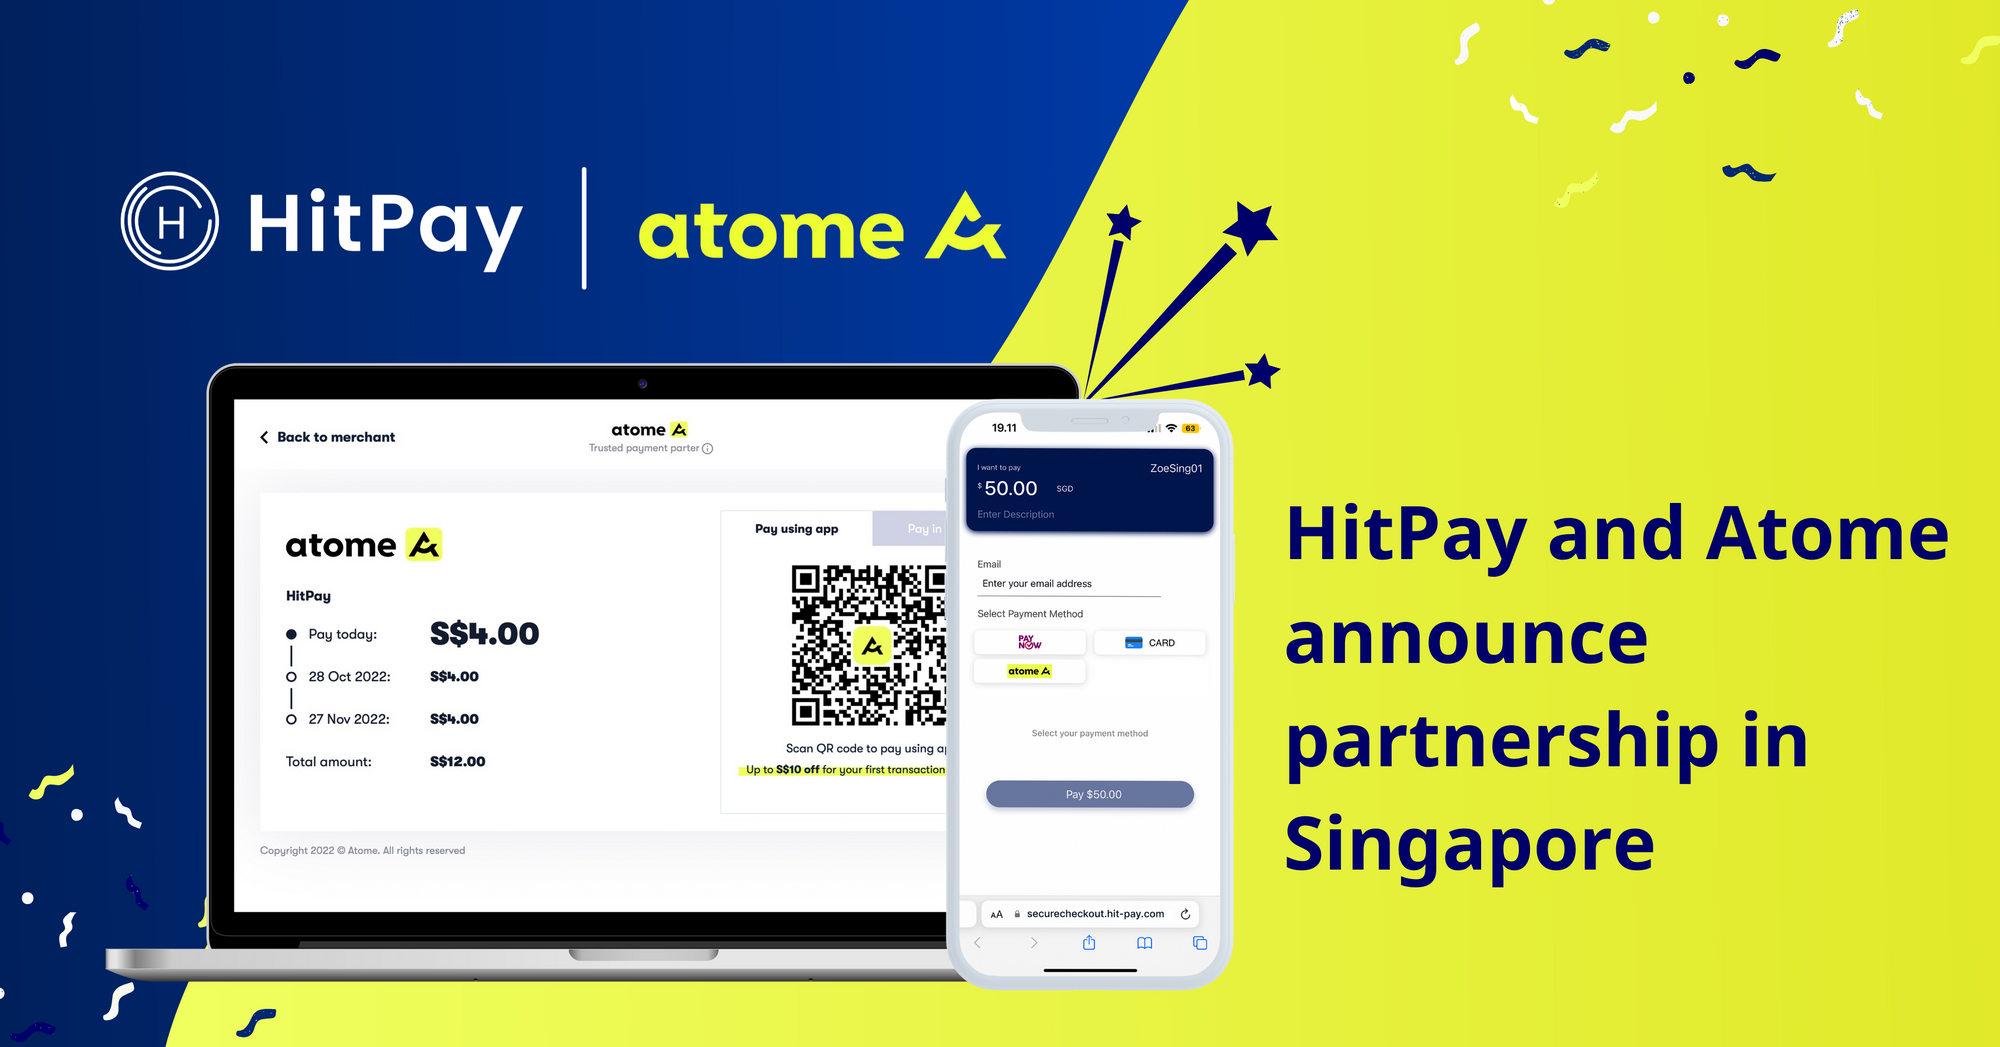 HitPay and Atome launch 0% interest BNPL payments for Singapore merchants